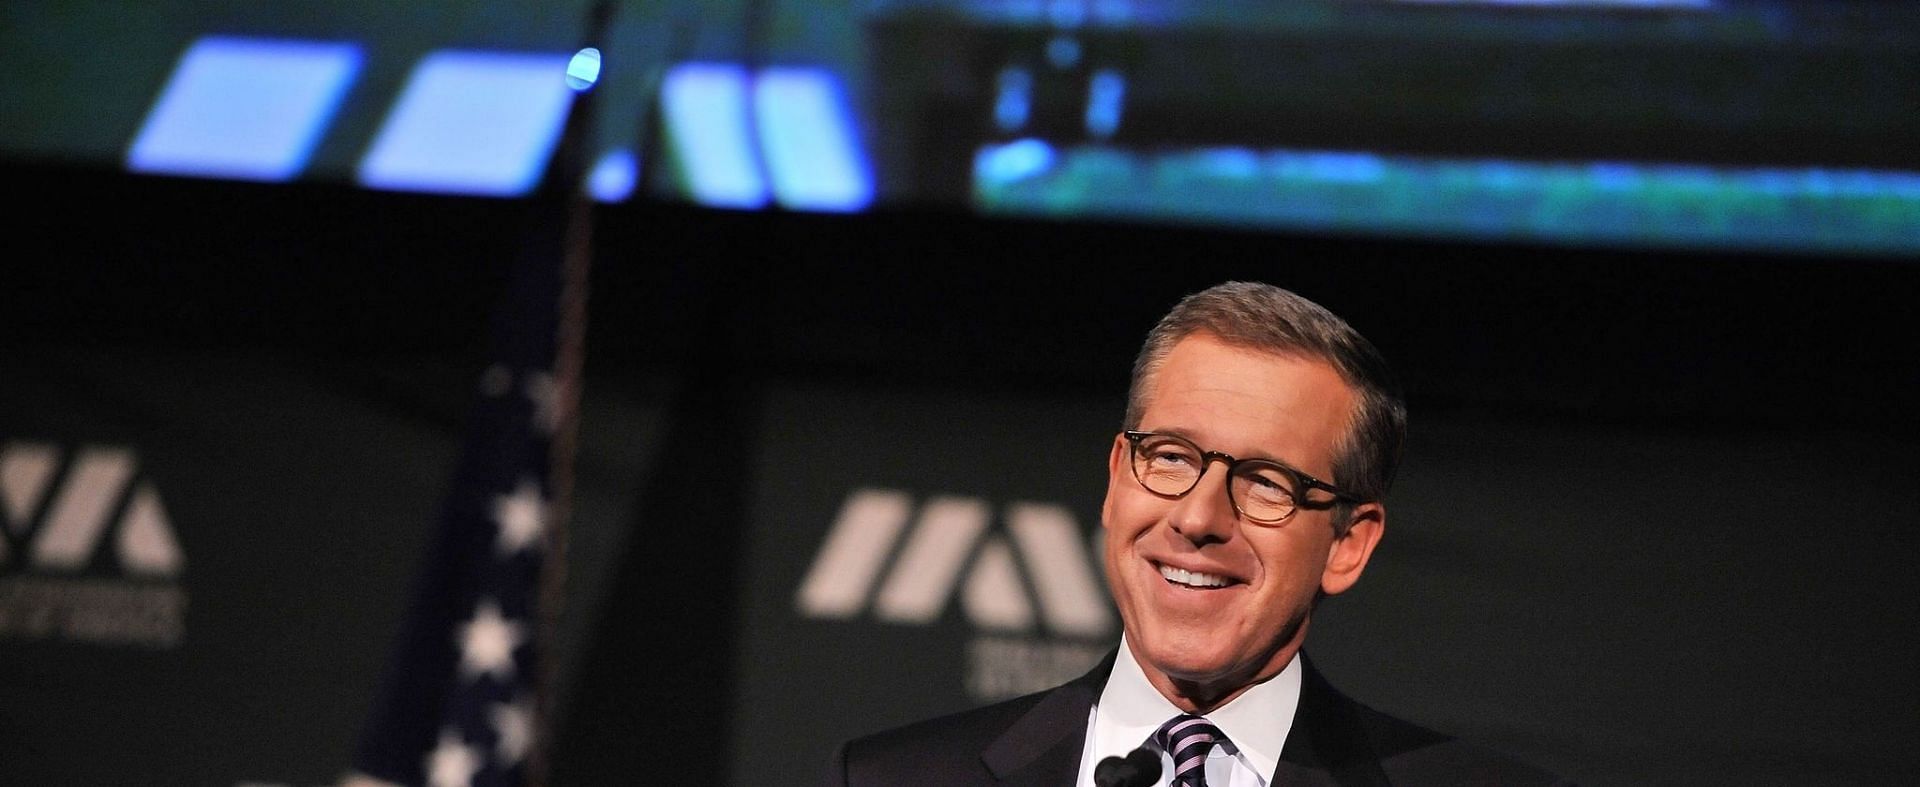 Brian Williams was associated with MSNBC for the past 28 years (Image via Fernando Leon/Getty Images)